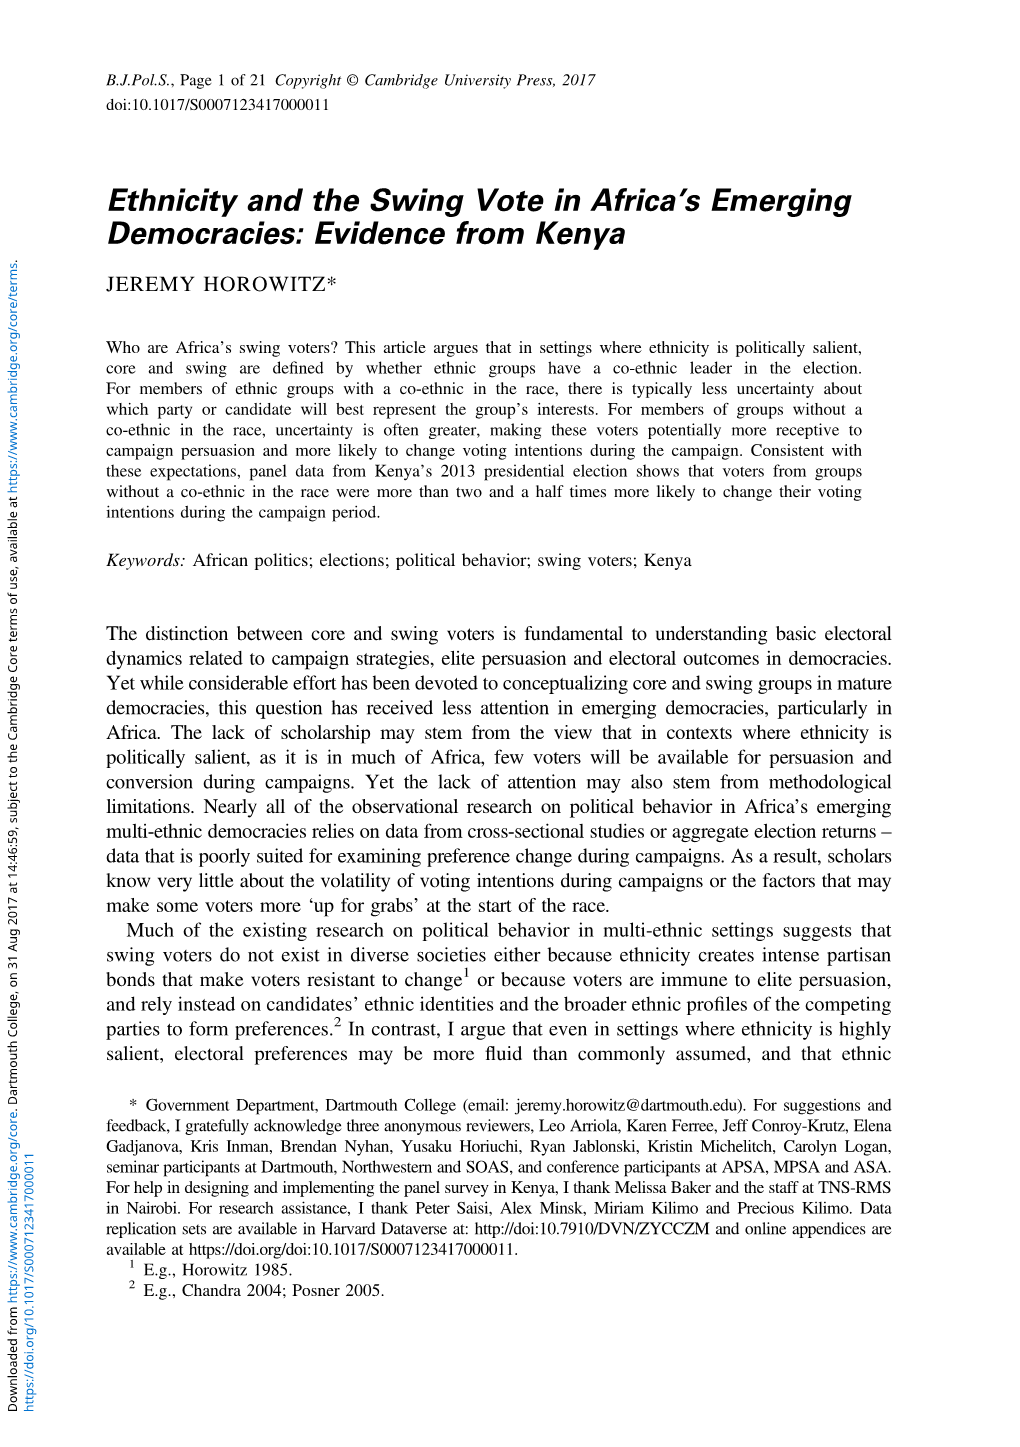 Ethnicity and the Swing Vote in Africads Emerging Democracies